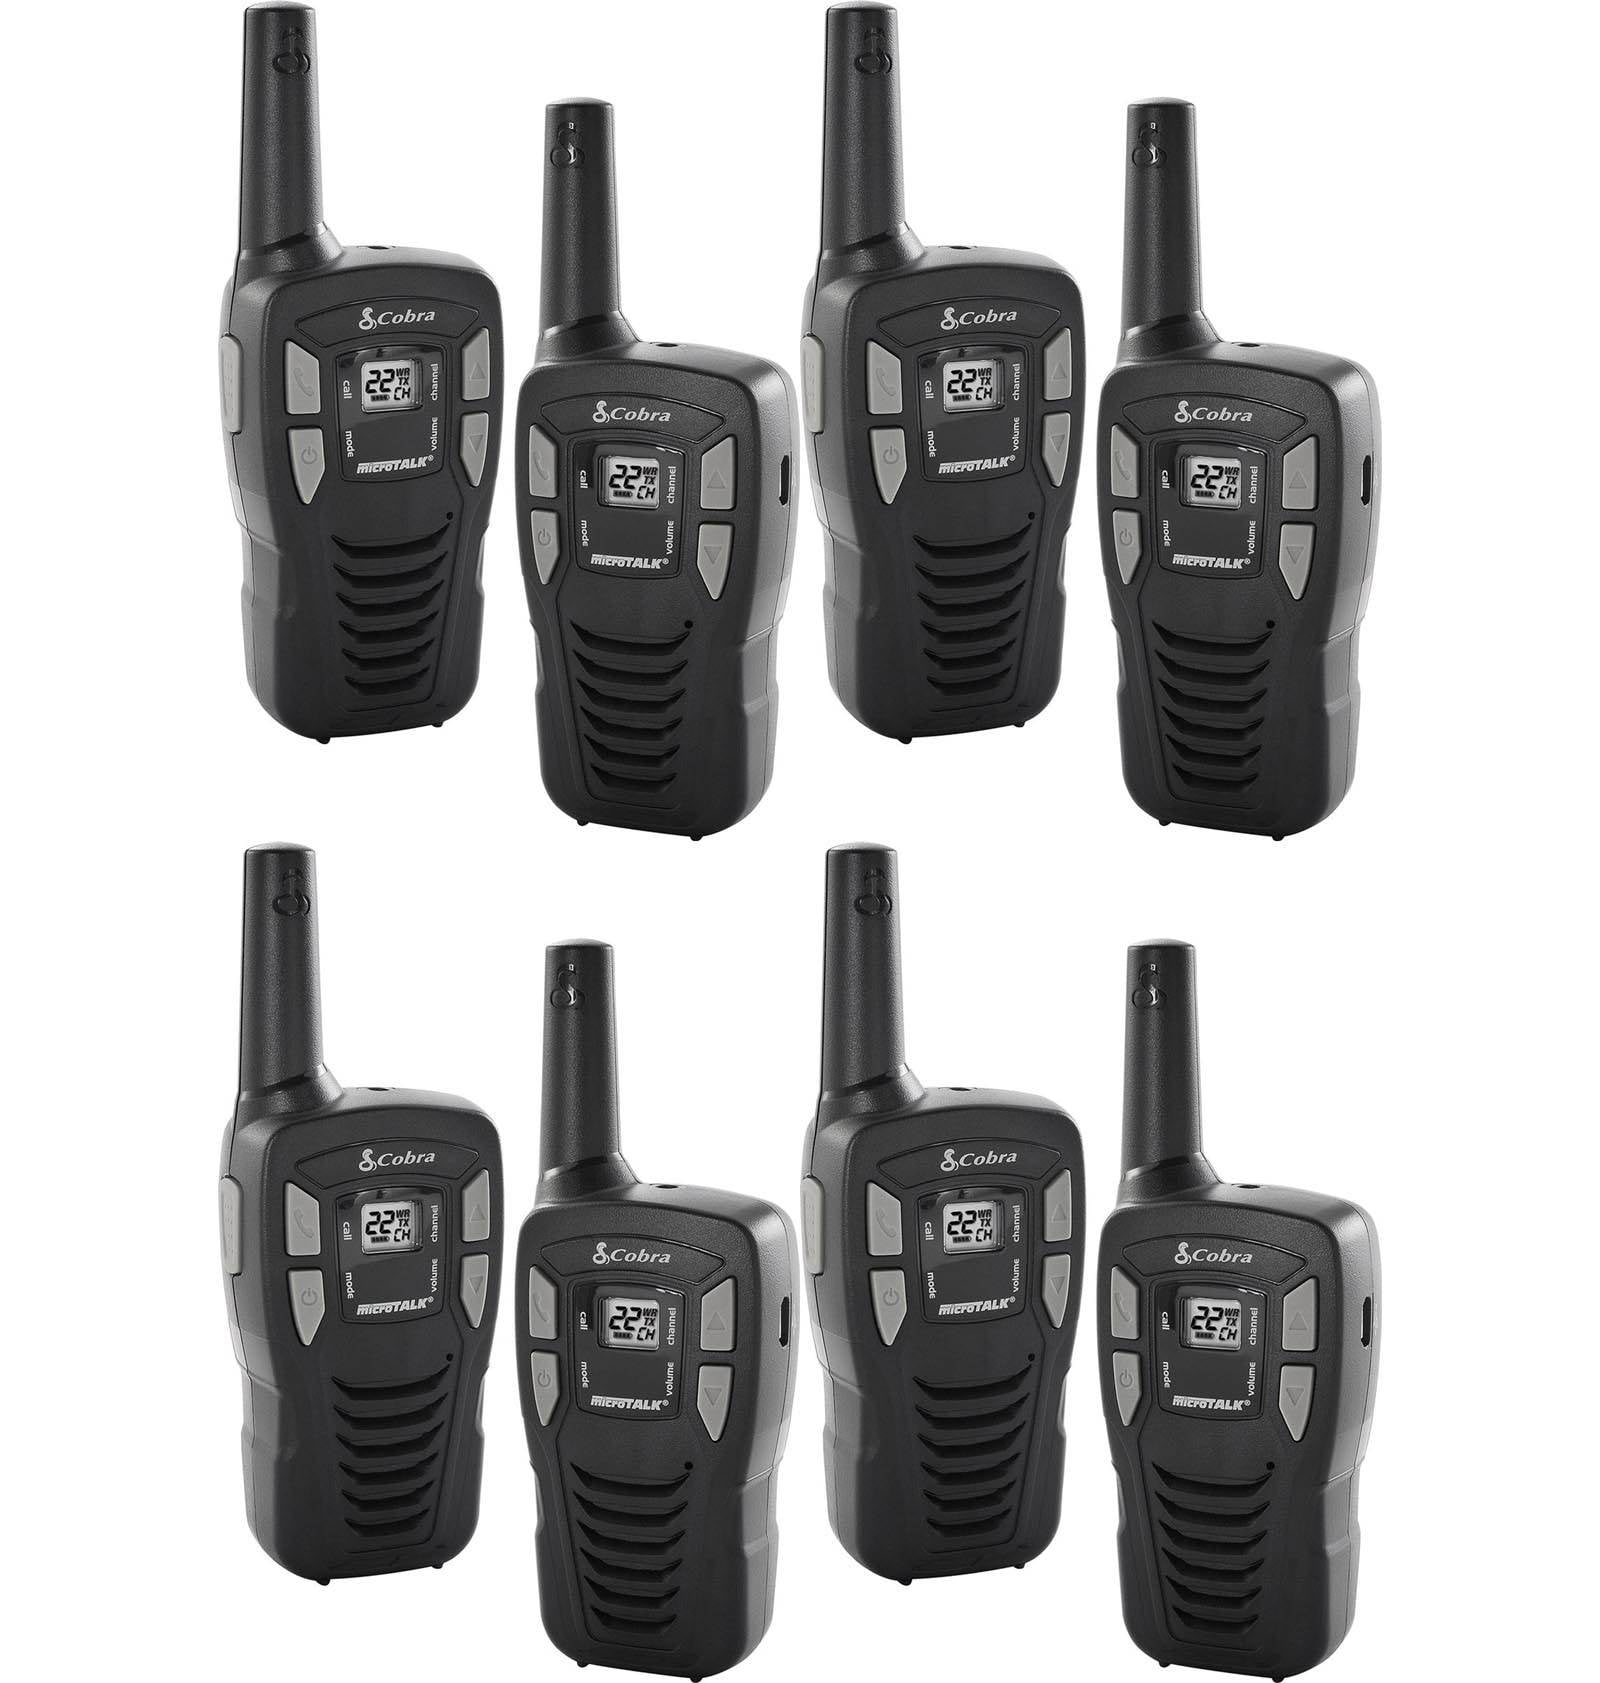 NEW! (8) Cobra CX112 16 Mile 22 Channel FRS/GMRS Walkie Talkie Two-Way  Radios